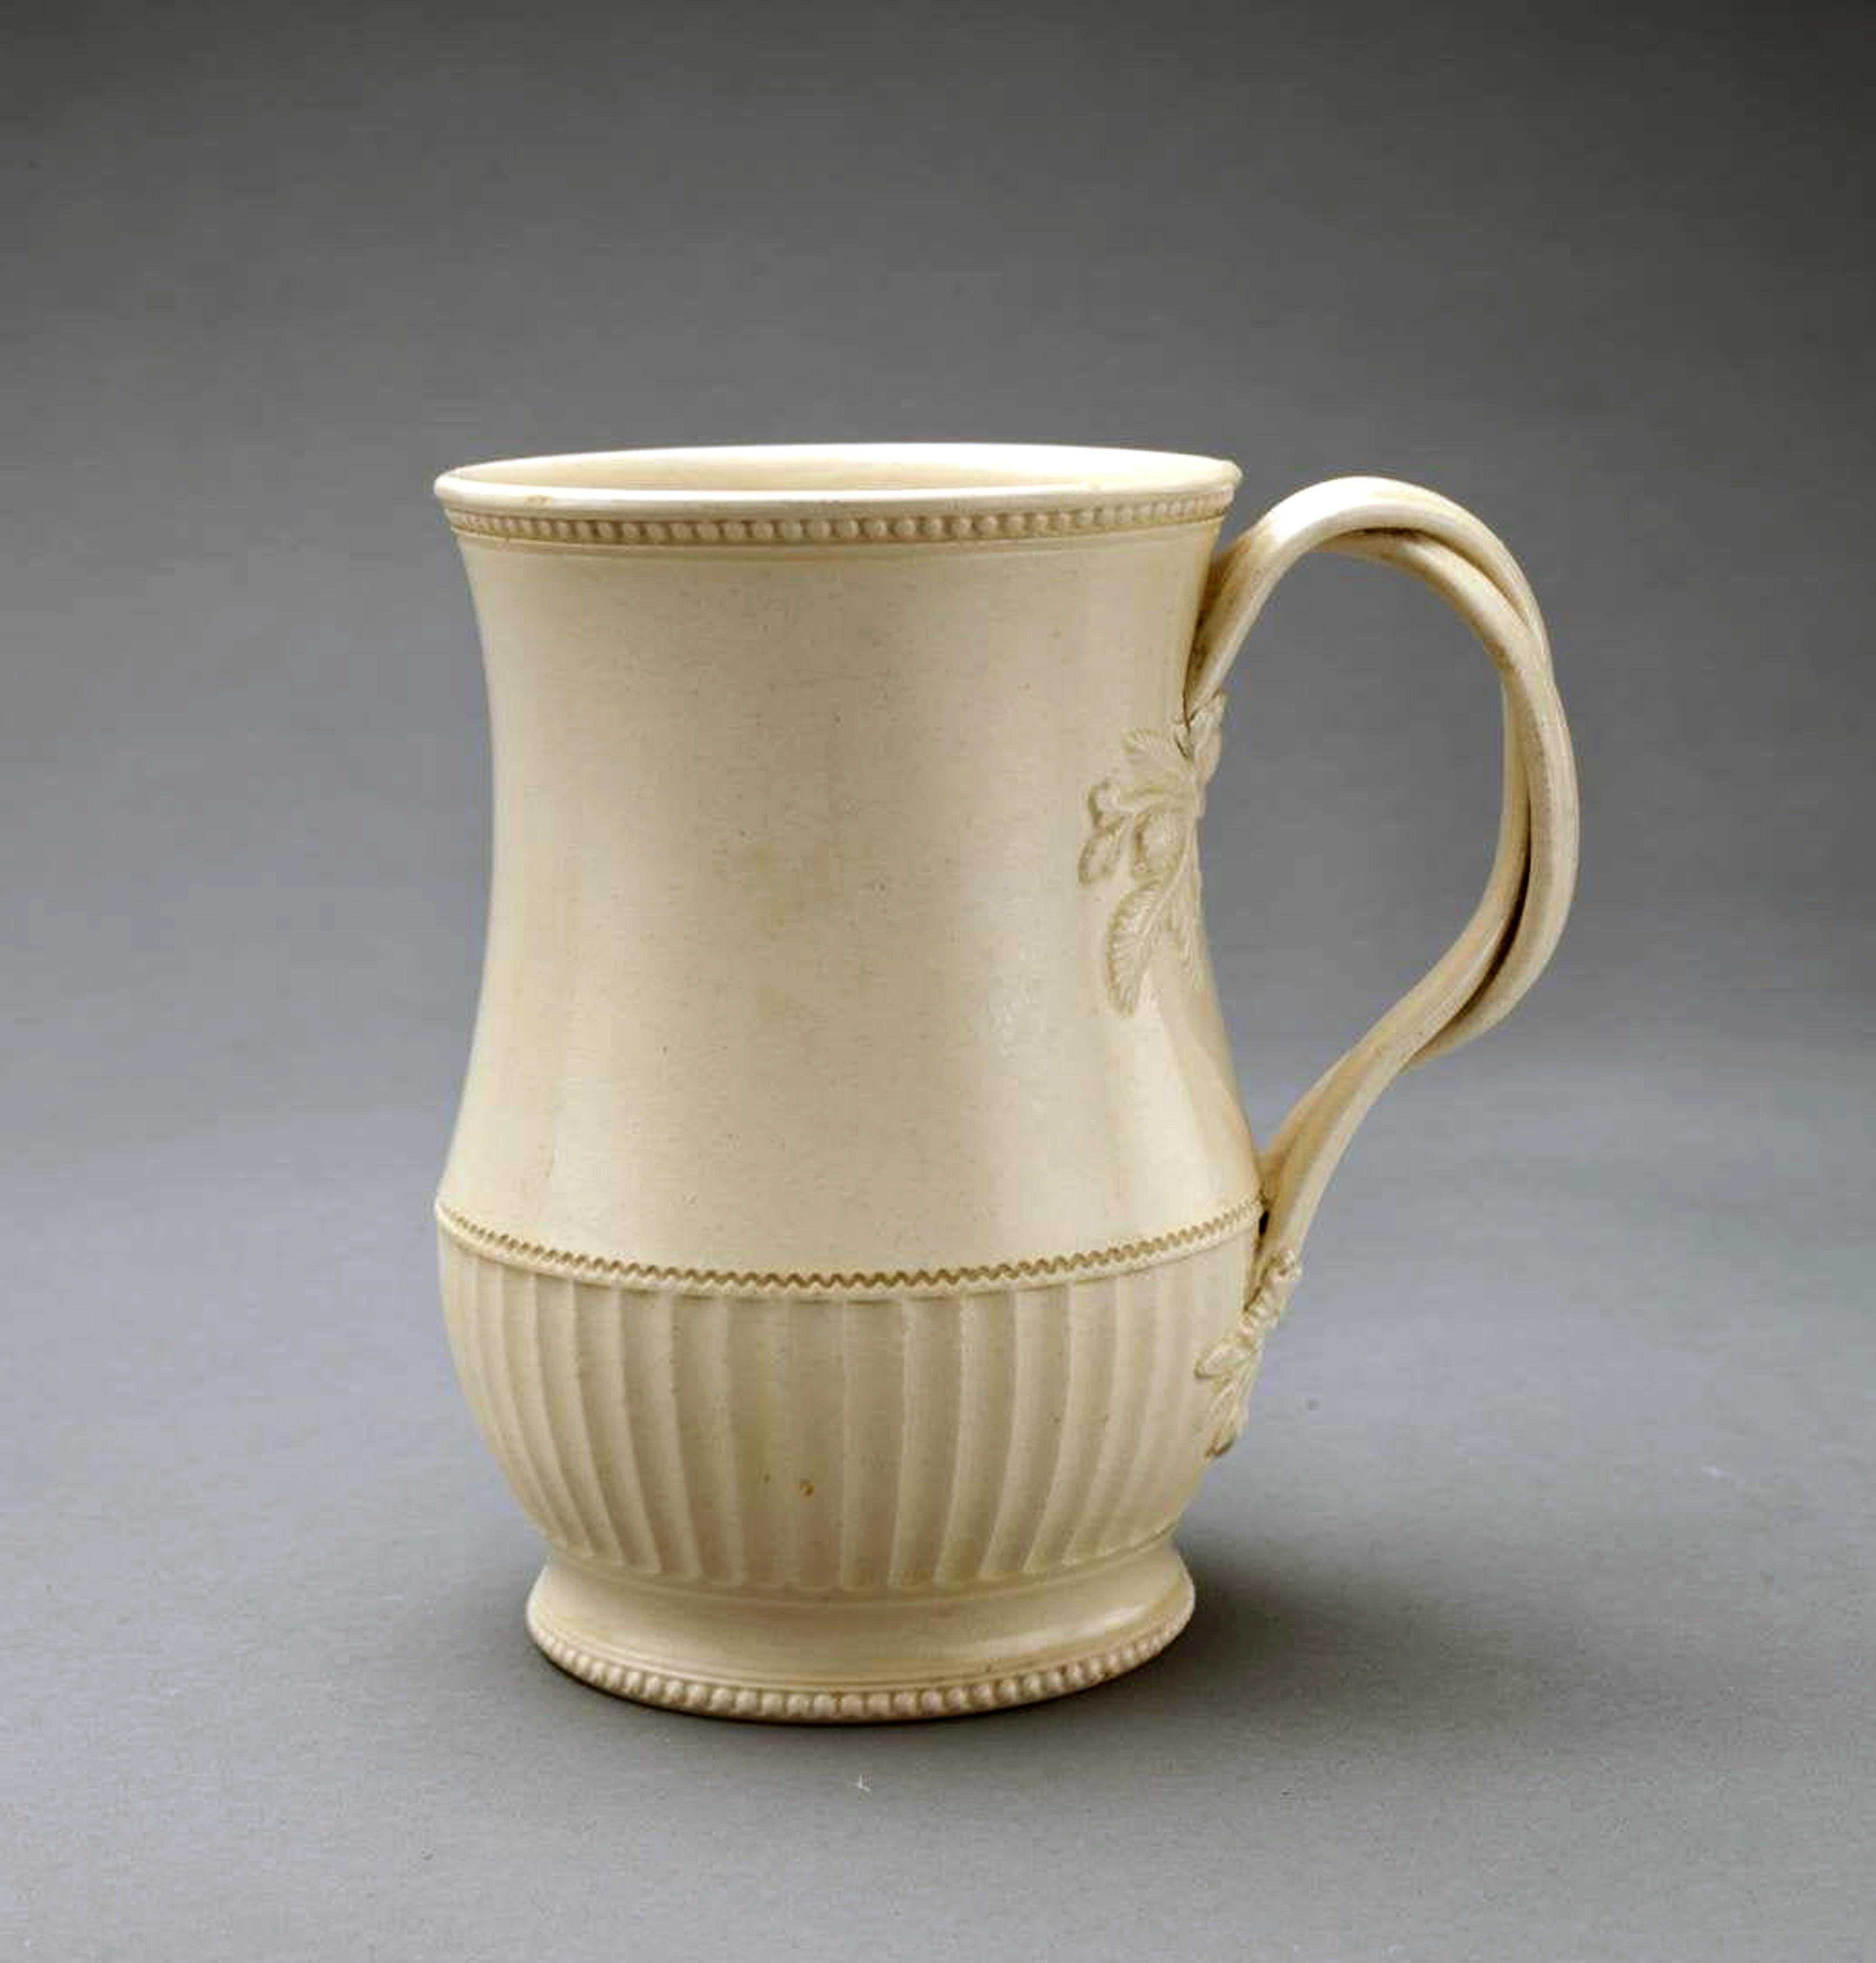 English plain Creamware Tankard,
Leeds,
Circa 1770

A Leeds creamware tankard, of ogee form, its lower third fluted and with beaded rim and foot-rim and with vine-twist handles terminating in flower and leaf sprigs. 

Dimensions: 
5 1/8